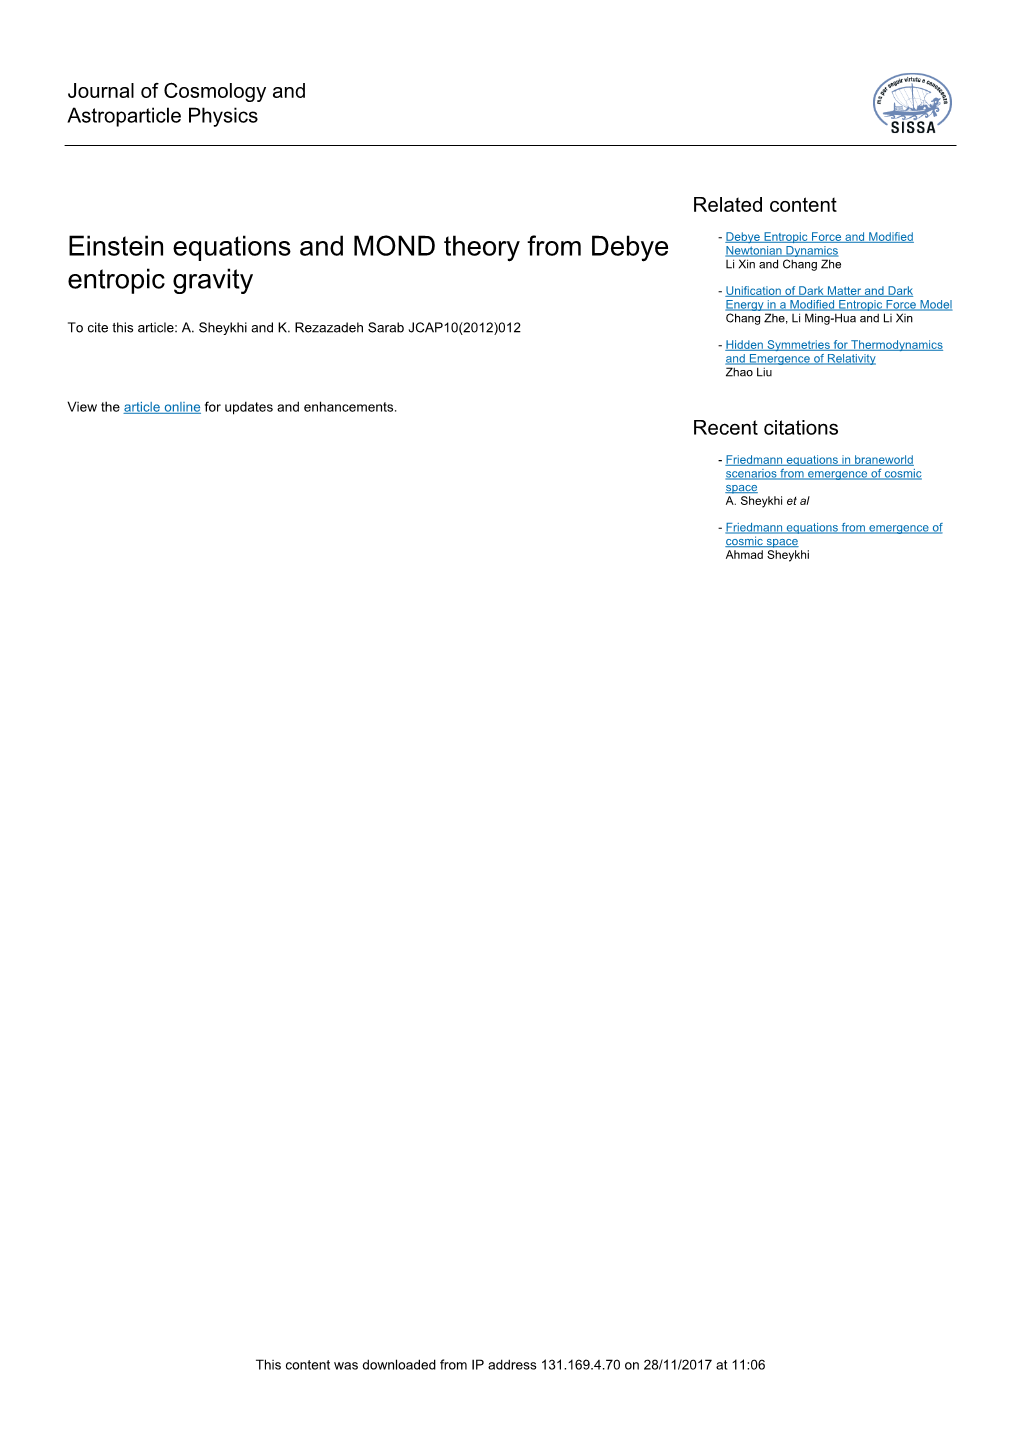 Einstein Equations and MOND Theory from Debye Entropic Gravity